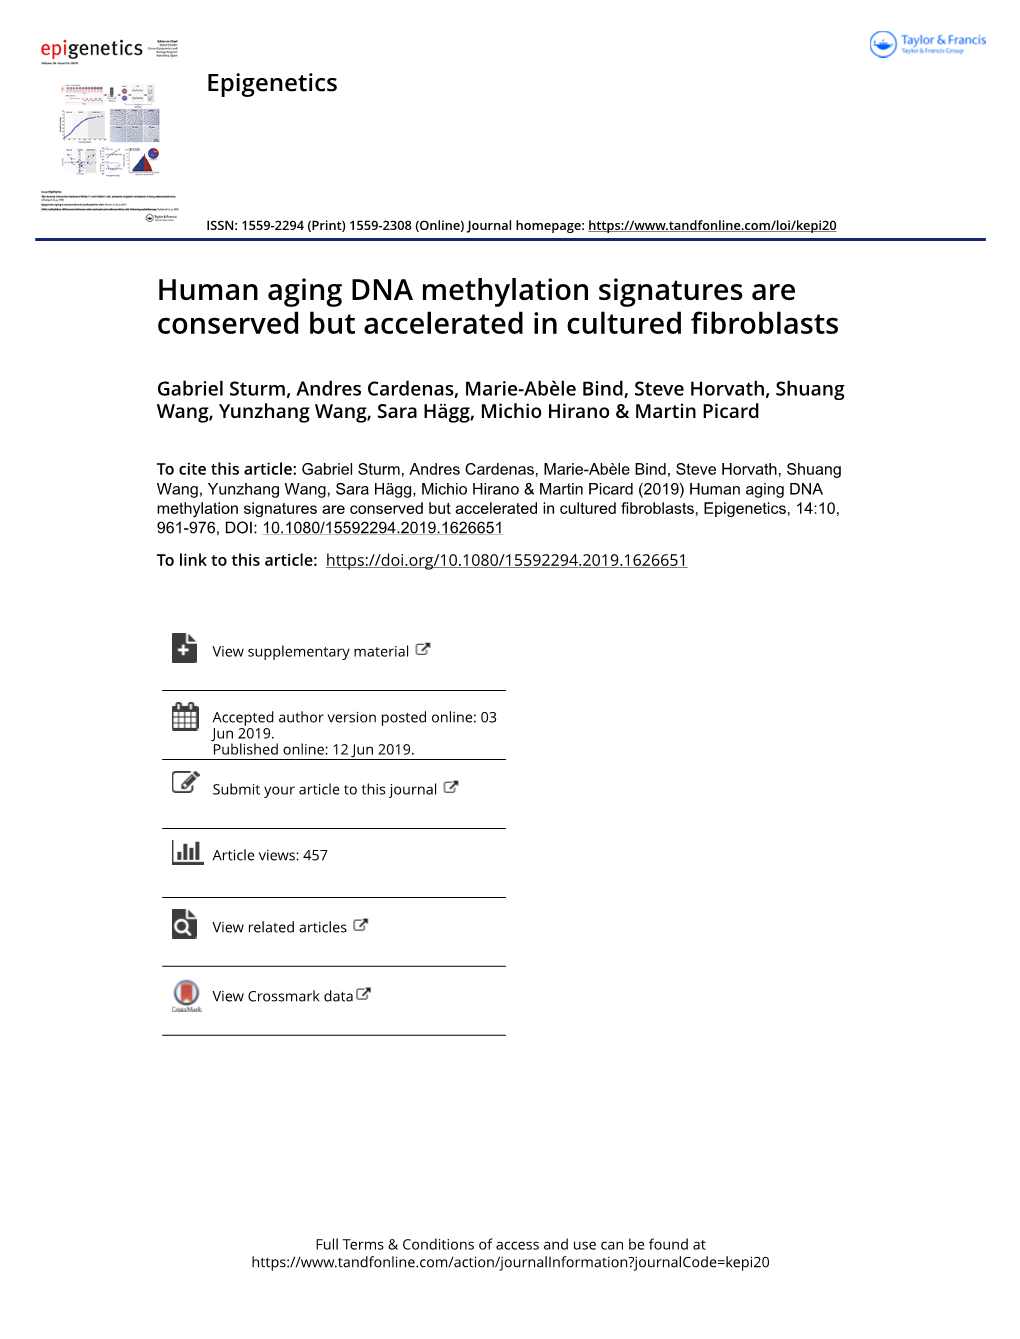 Human Aging DNA Methylation Signatures Are Conserved but Accelerated in Cultured Fibroblasts